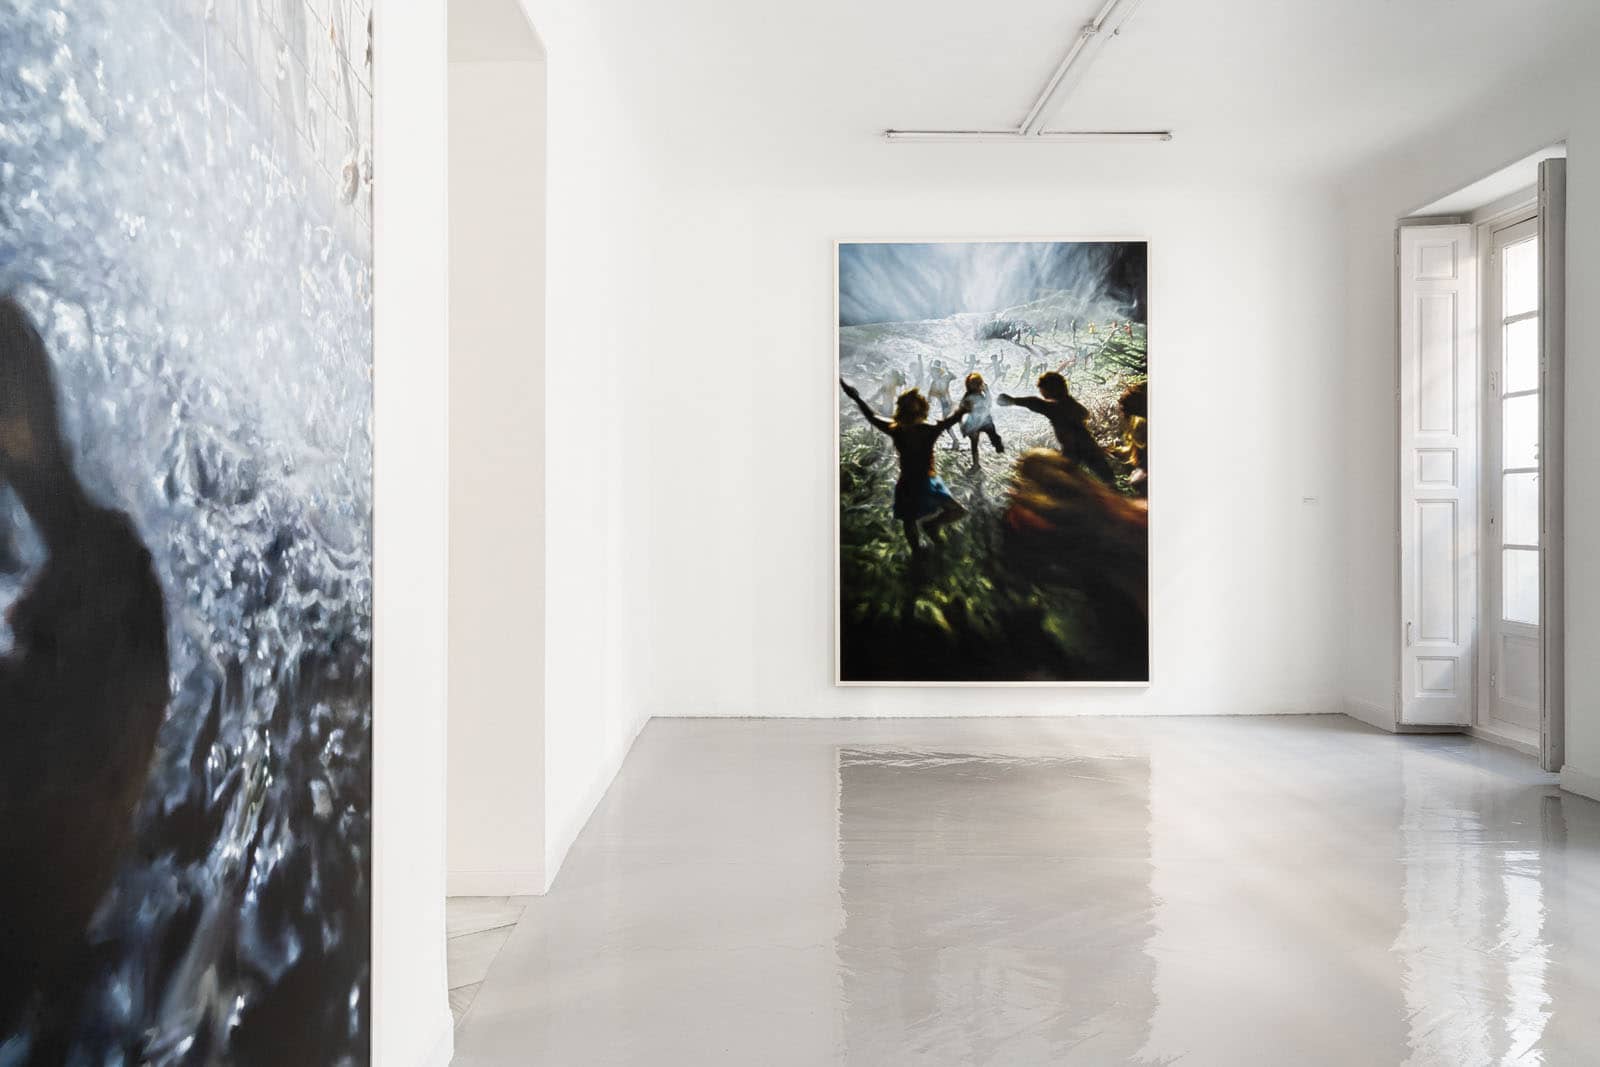 Exhibition view of the solo show "Falada" by Philipp Fröhlich at Juana de Aizpuru gallery in Spain, 2022. The image shows a fragment and another painting based on the legend of the pied piper, as collected by the brothers Grimm.